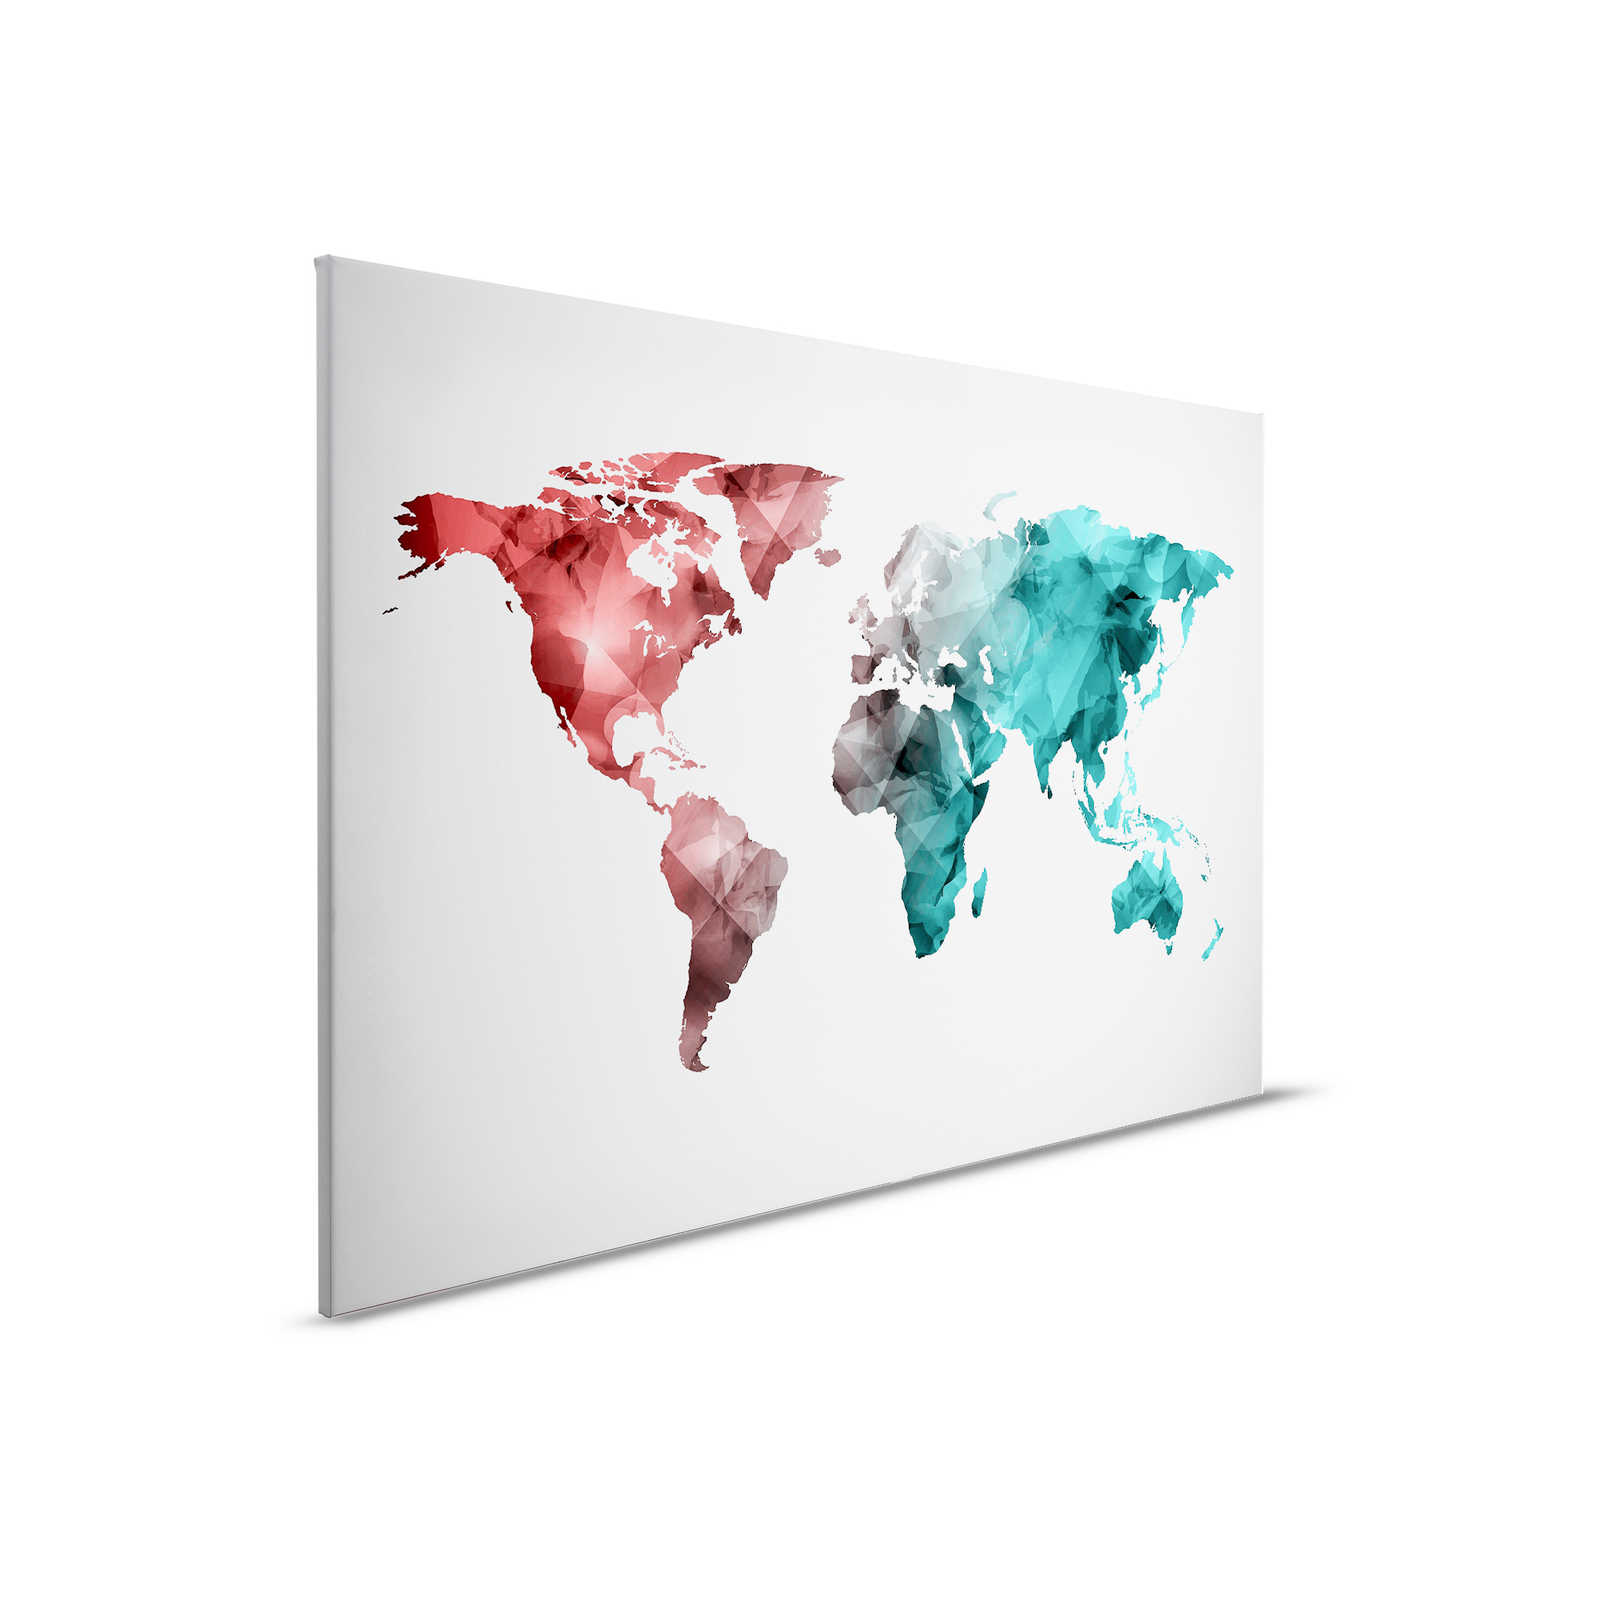 Canvas with world map made of graphic elements | WorldGrafic 2 - 0.90 m x 0.60 m
